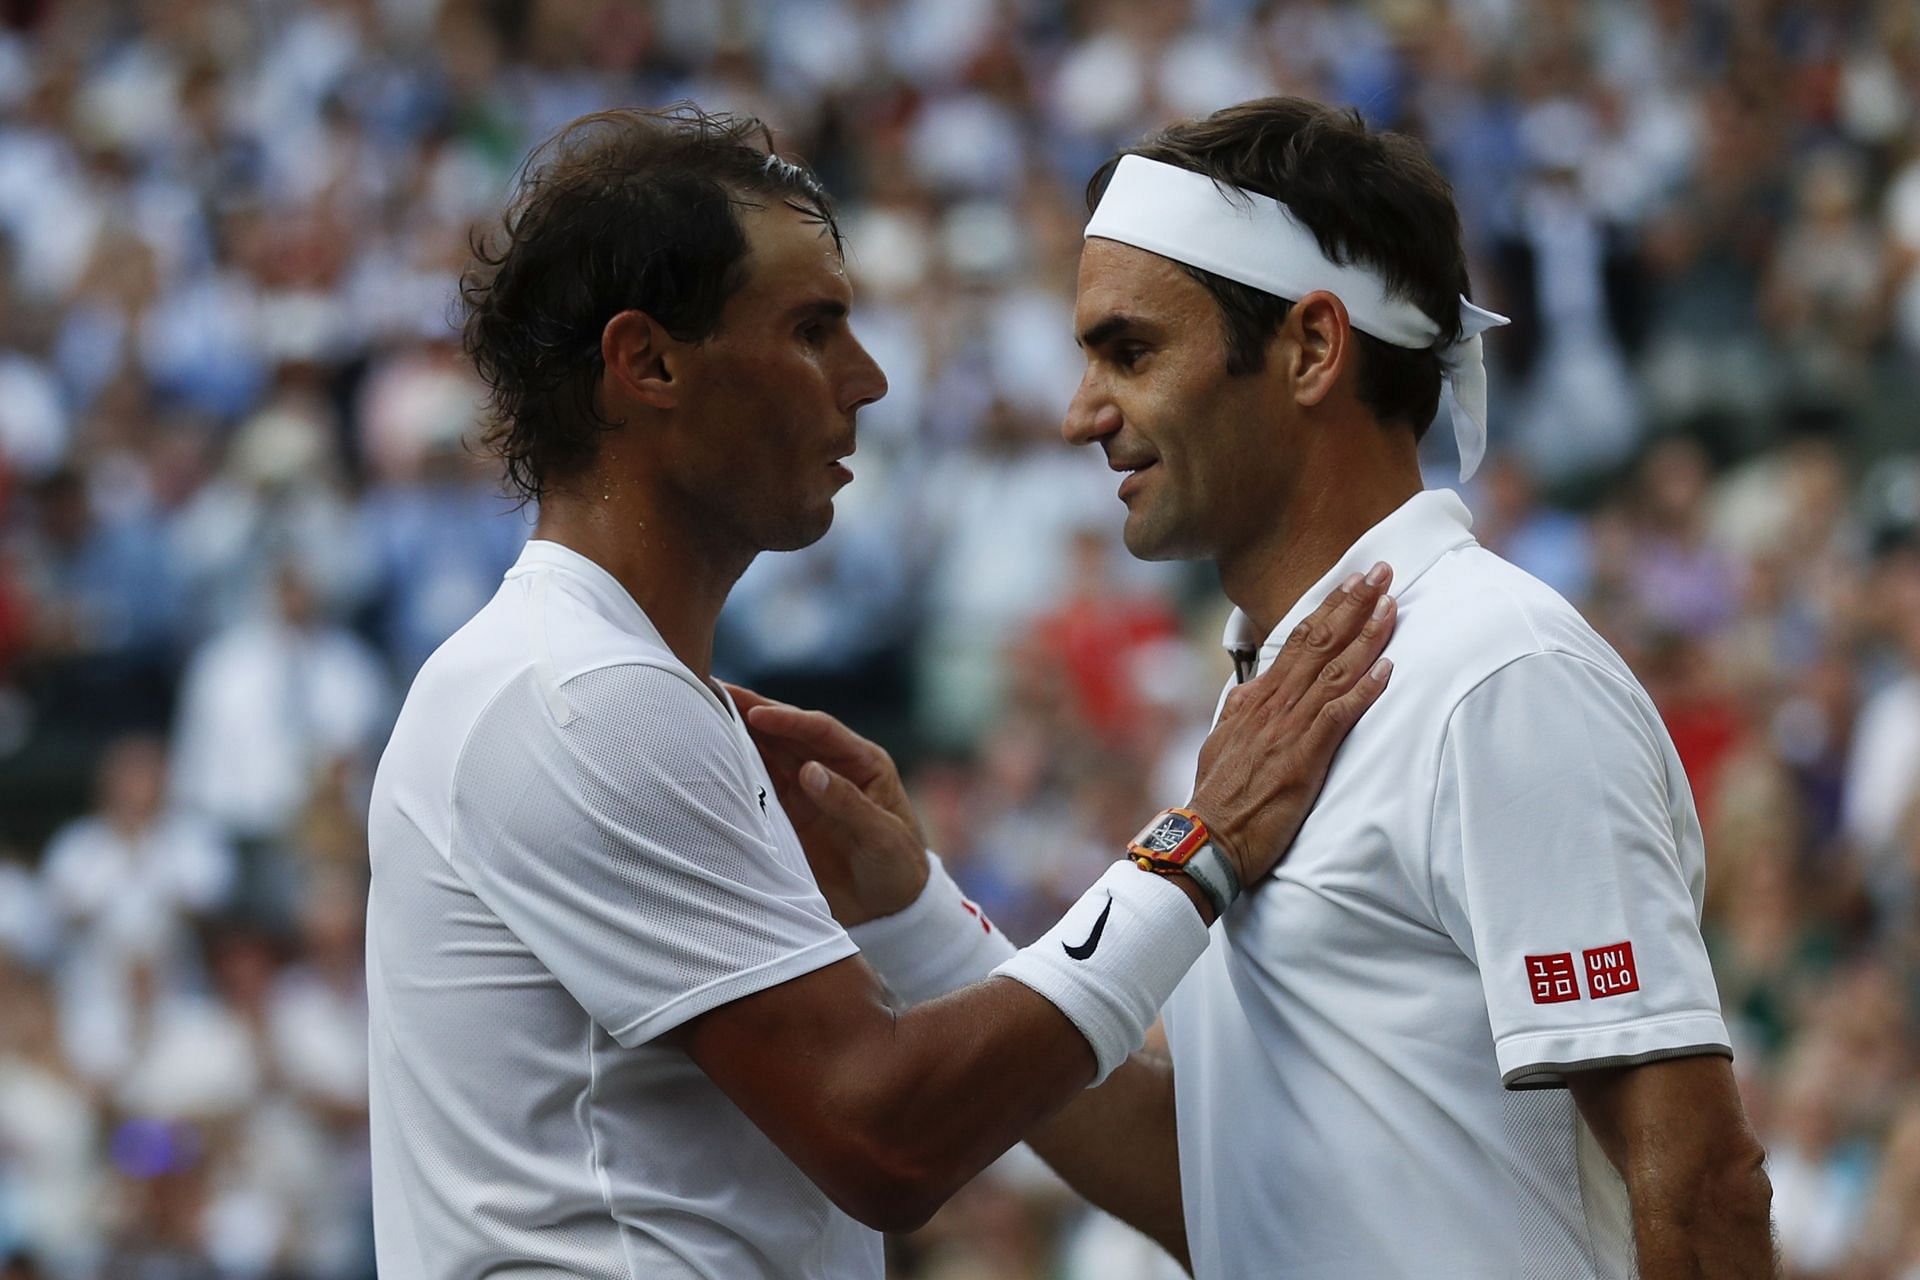 Rafael Nadal and Roger Federer greet each other after a match